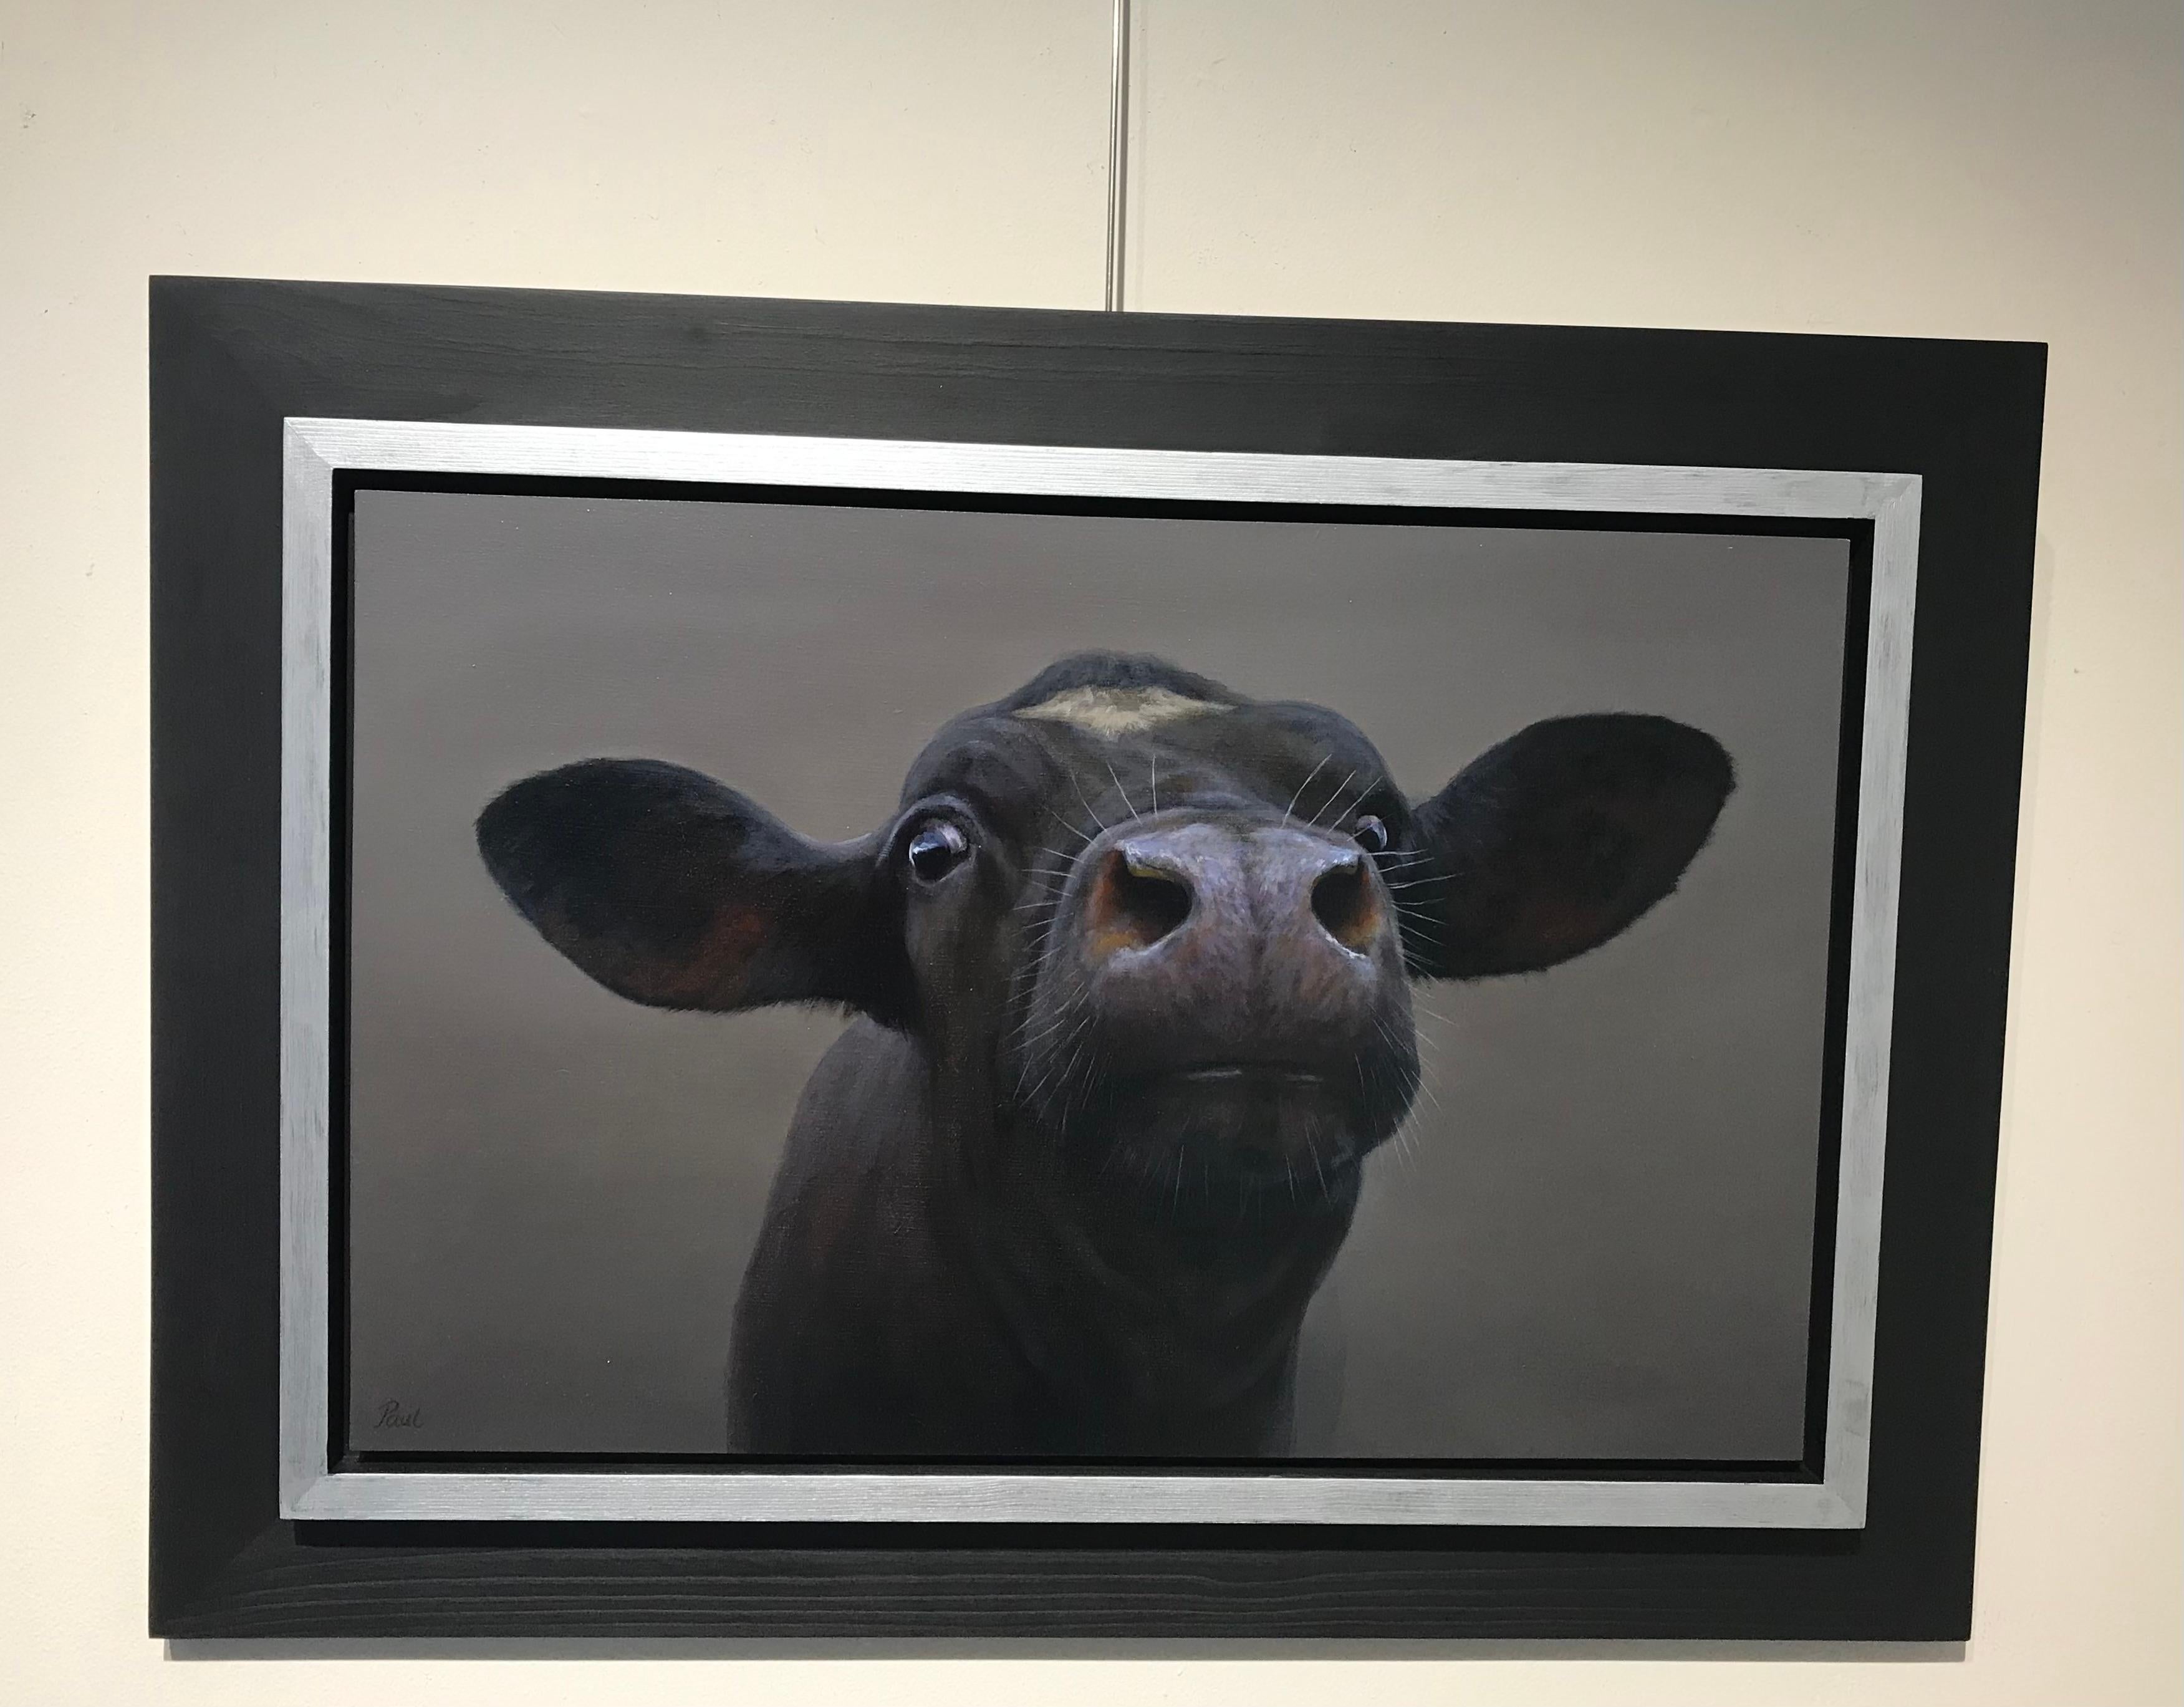 The oil paintings of the contemporary Dutch artist Paul Jansen invites the viewer to look beyond the standard picture within the frame. It feels as if the curious animal really reaches out of the frame, as if the viewer stands face-to-face with the